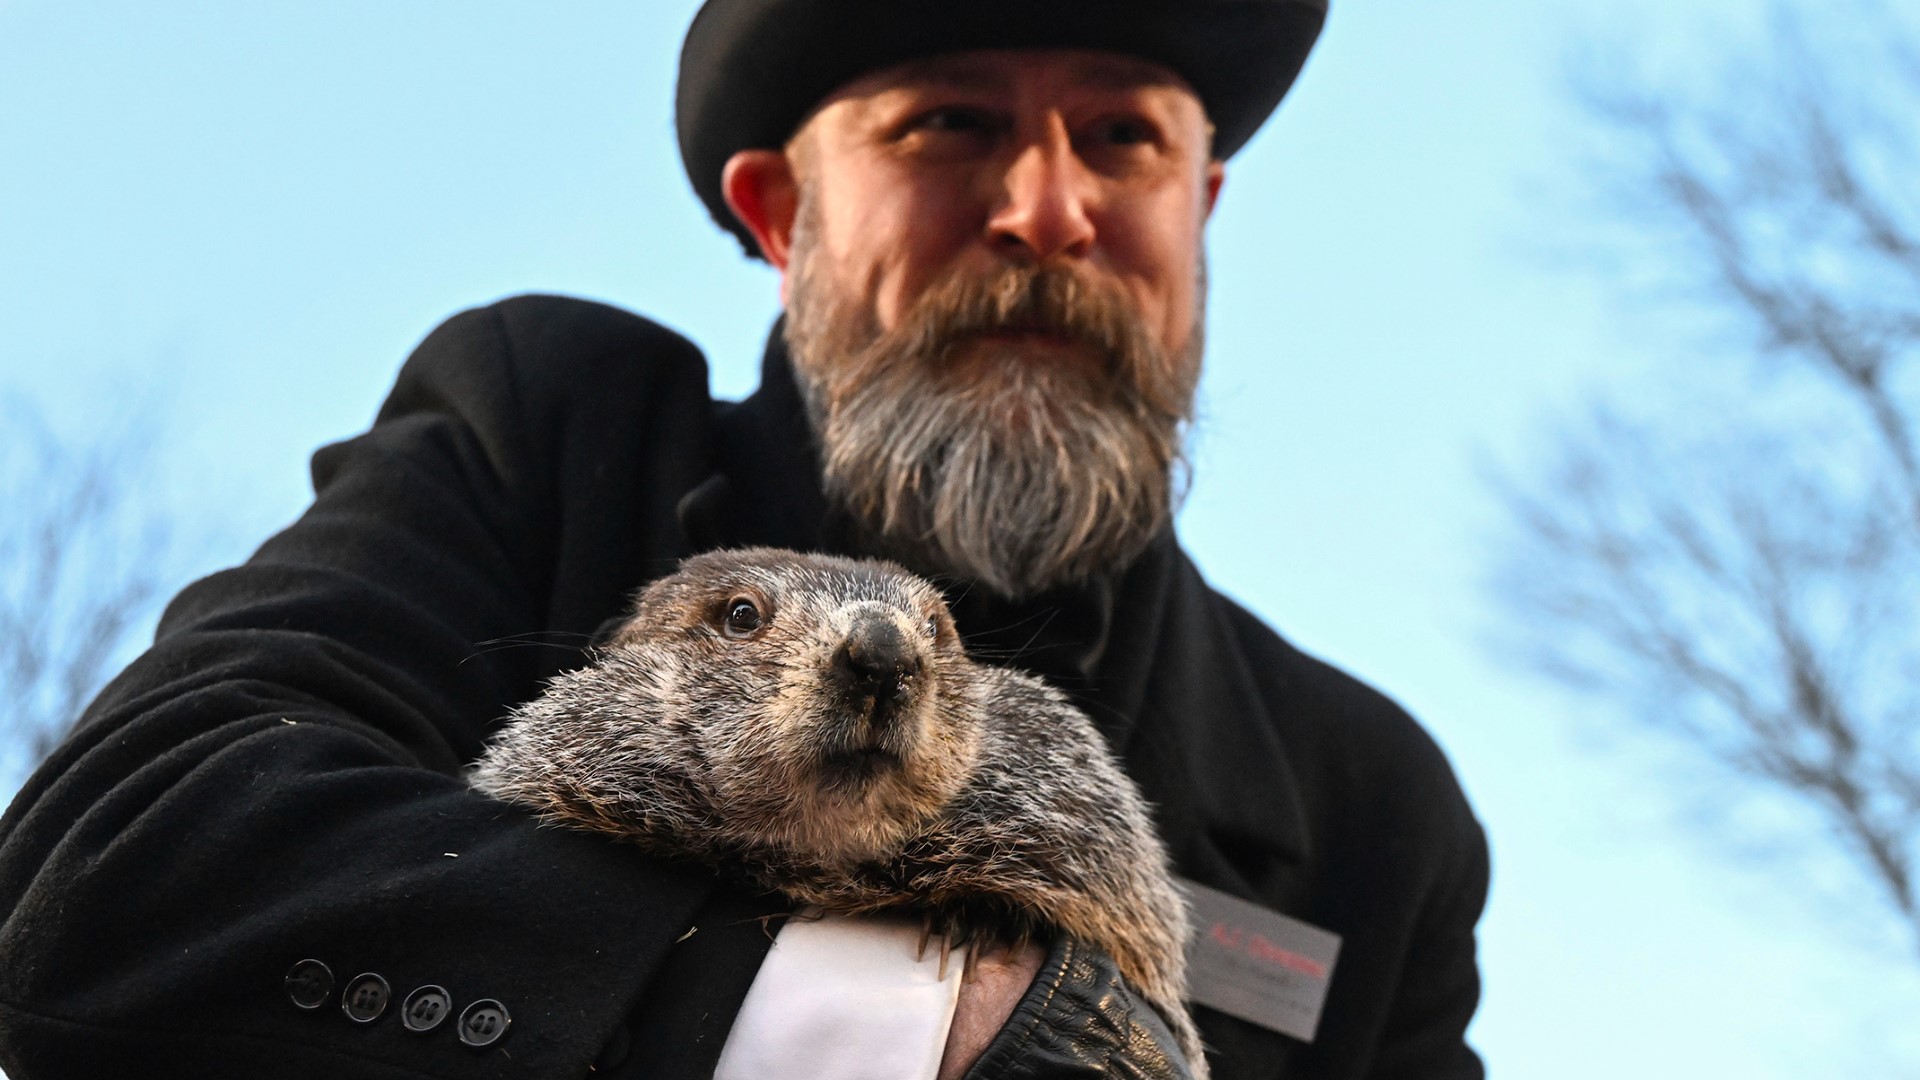 PETA wants to replace Punxsutawney Phil with a giant gold coin | kare11.com